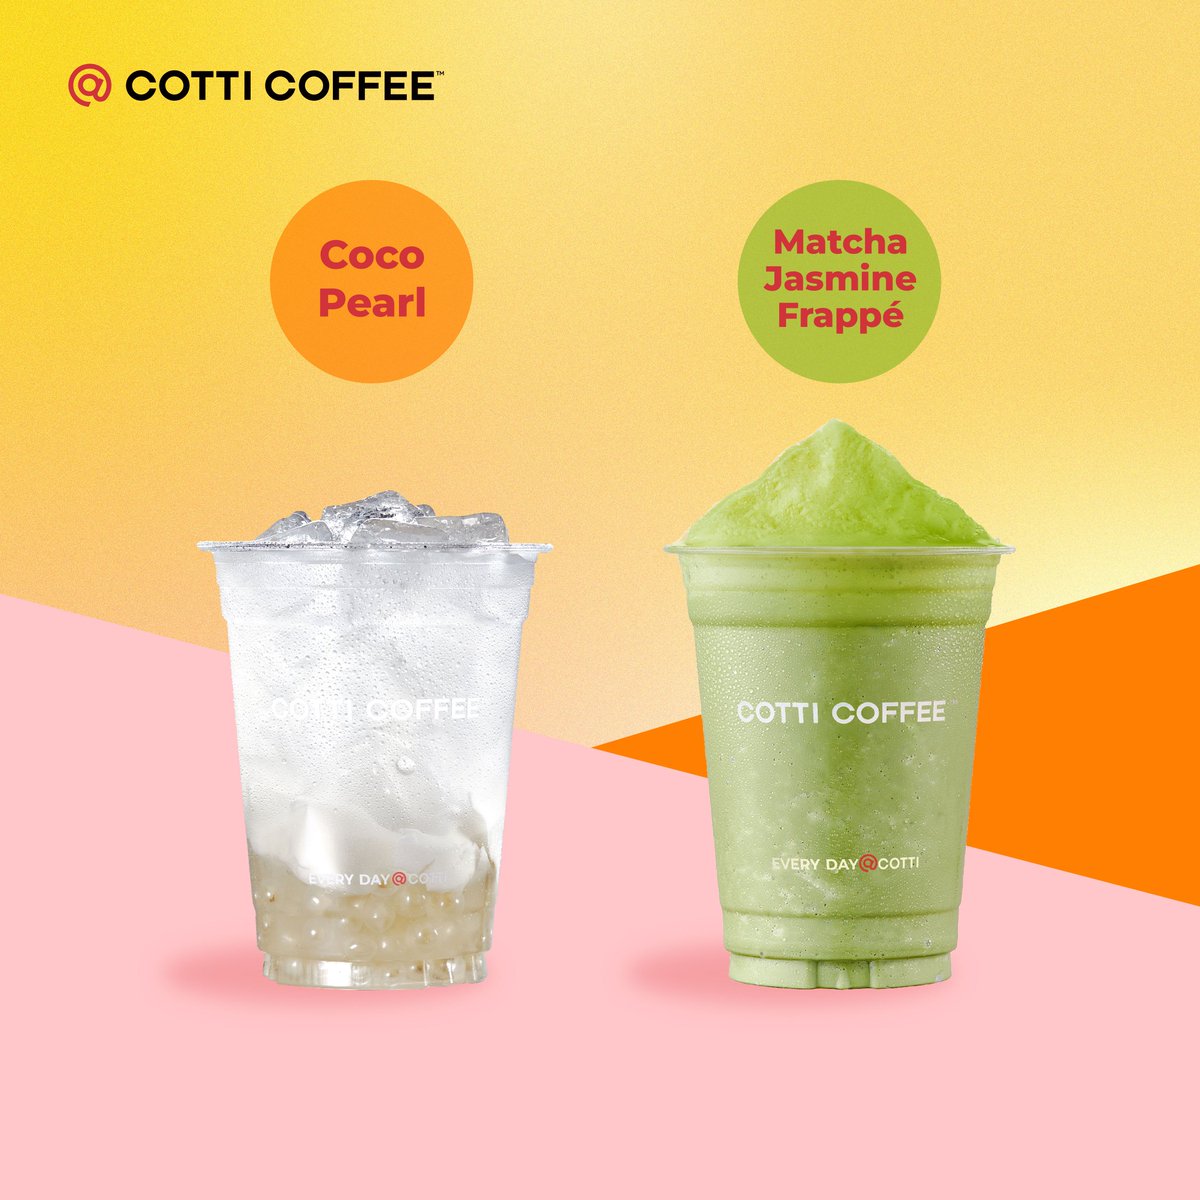 🌟 This May, refresh your days with COTTI's exclusive drinks! 🌟

🥥Coco Pearl

🍵Matcha Jasmine Frappé

#cotticoffee#everydaycotti#drinkcoffee#coffeelover#specialoffer